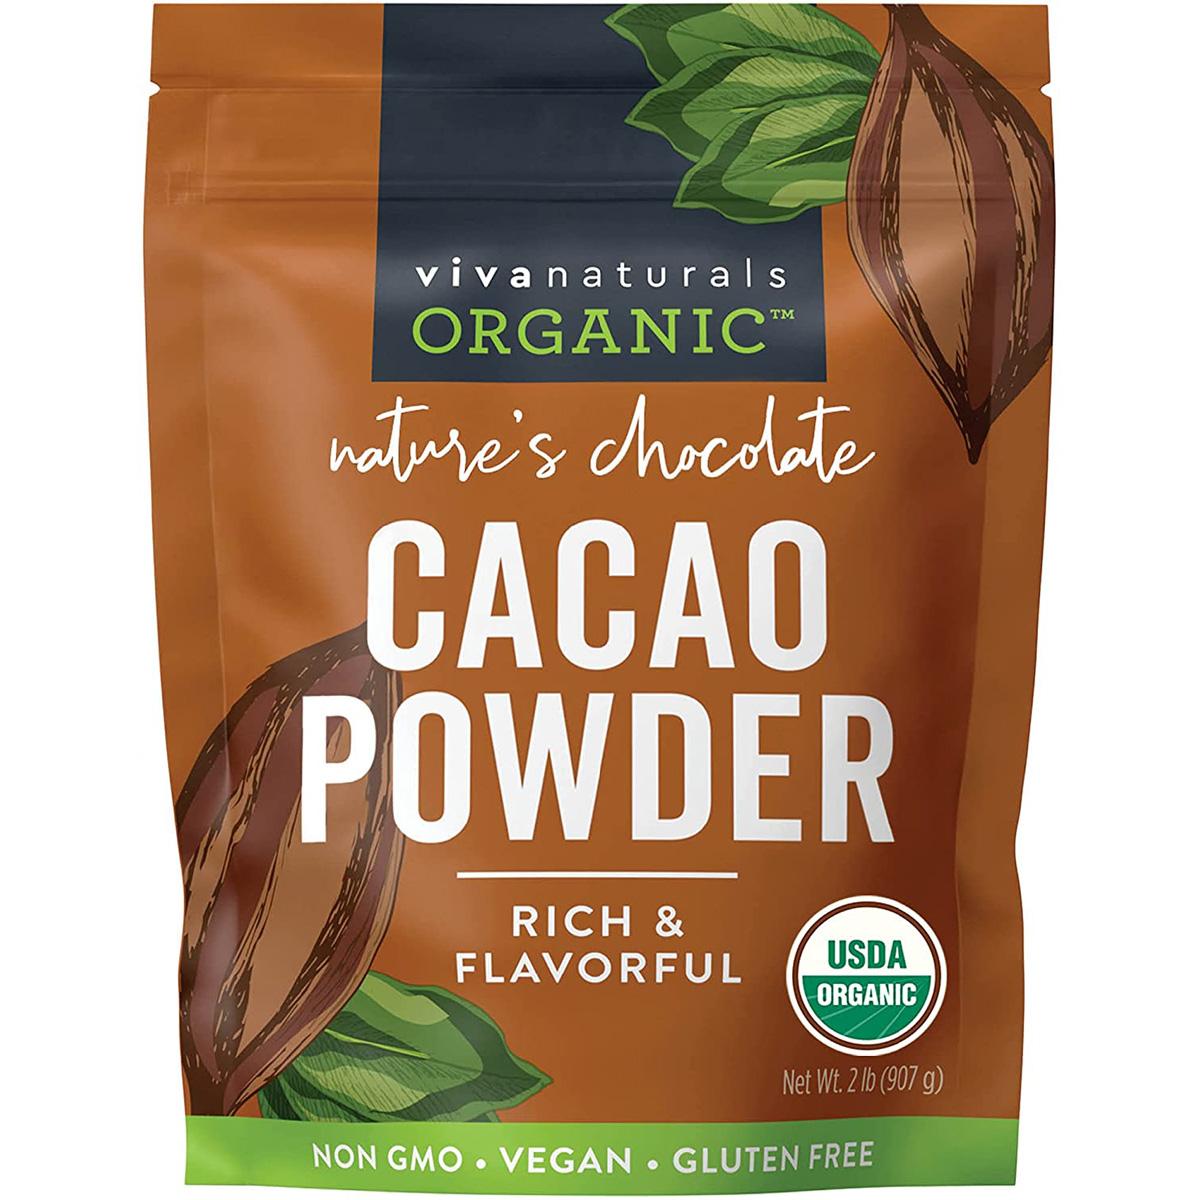 Viva Naturals Organic Cacao Powder 2Lbs for $9.21 Shipped